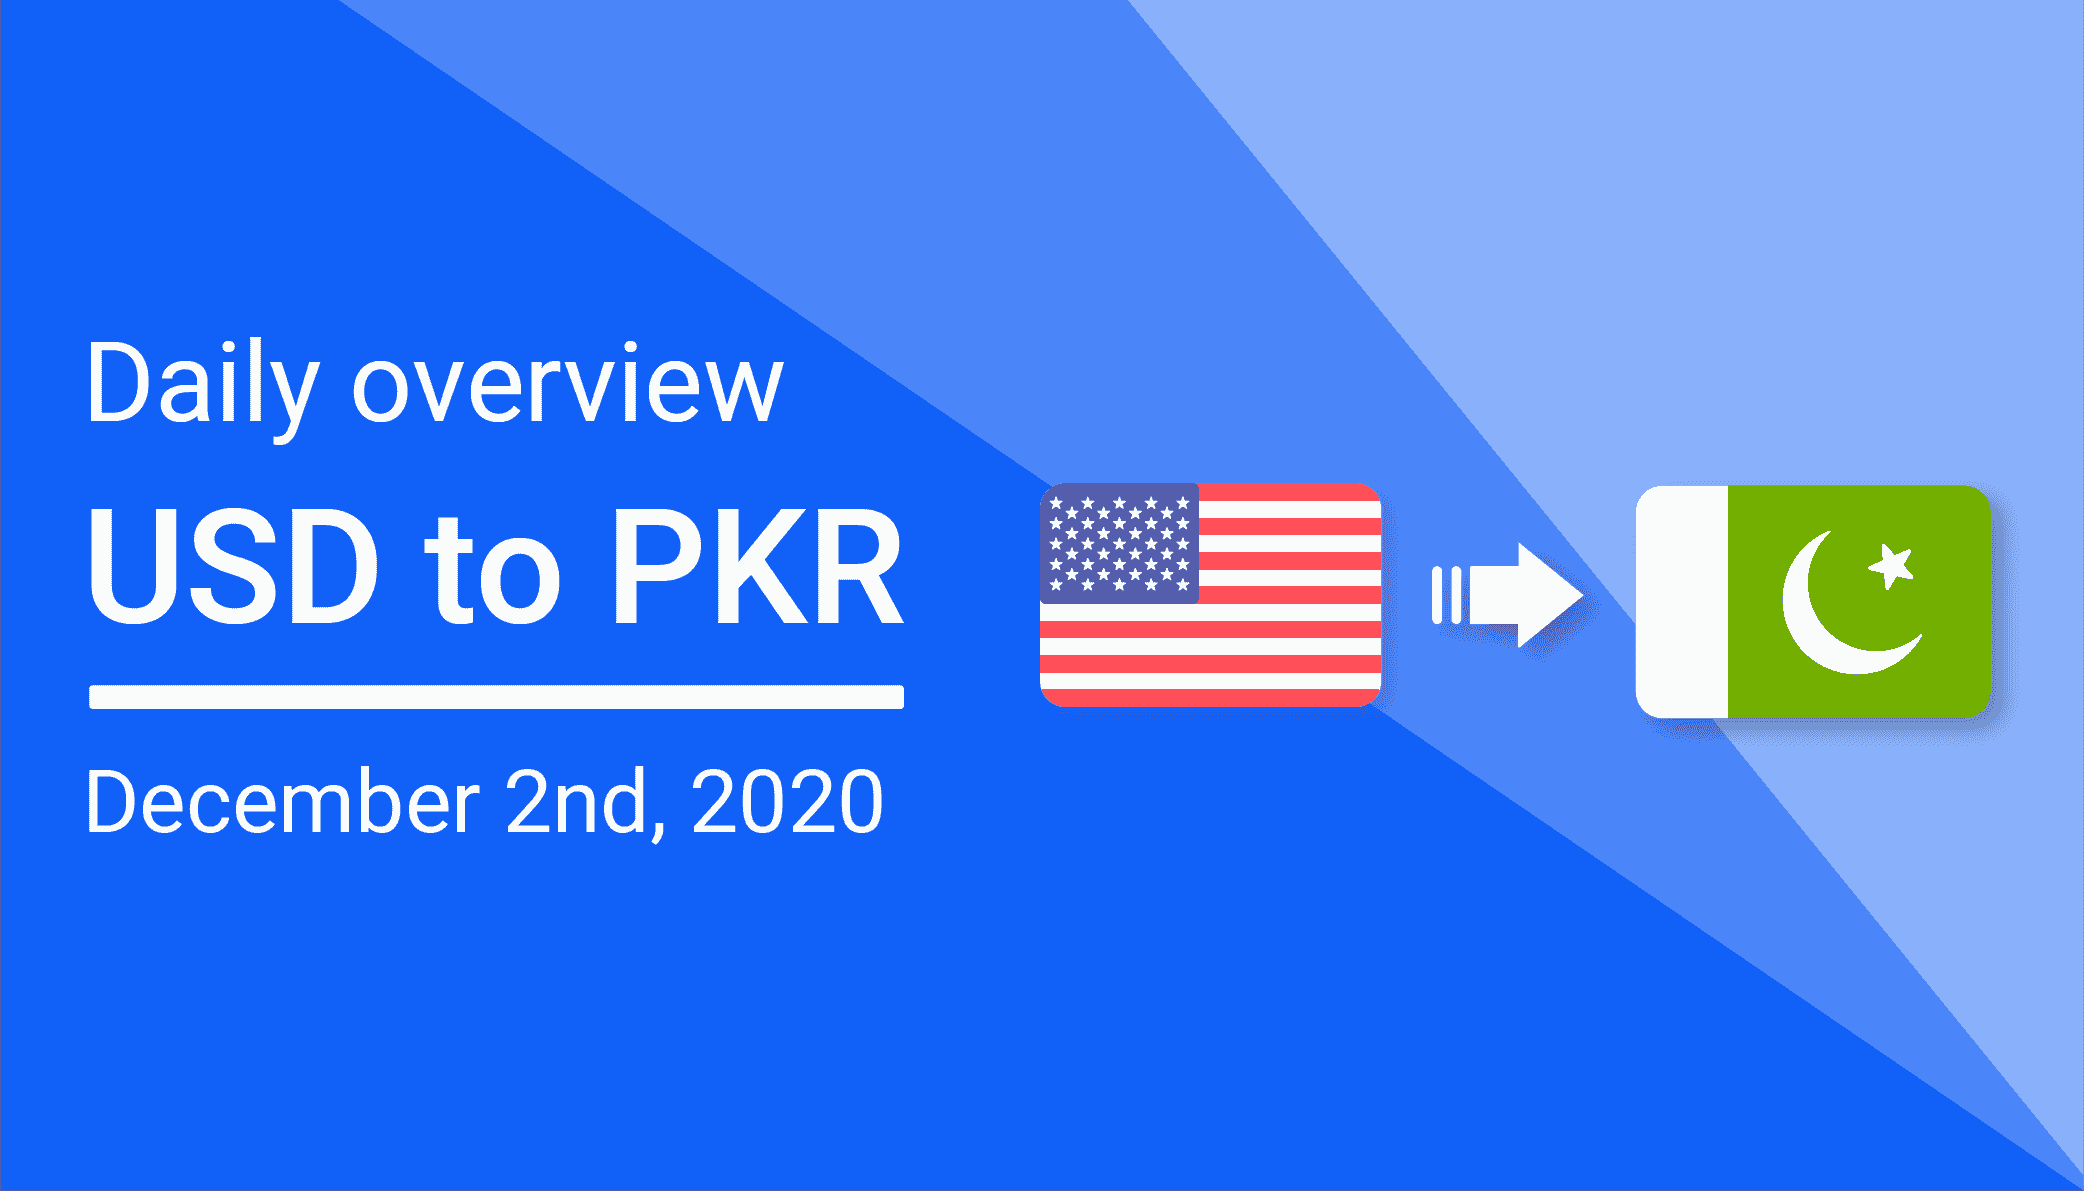 USD to PKR Daily Overview December 2nd Remitbee blog